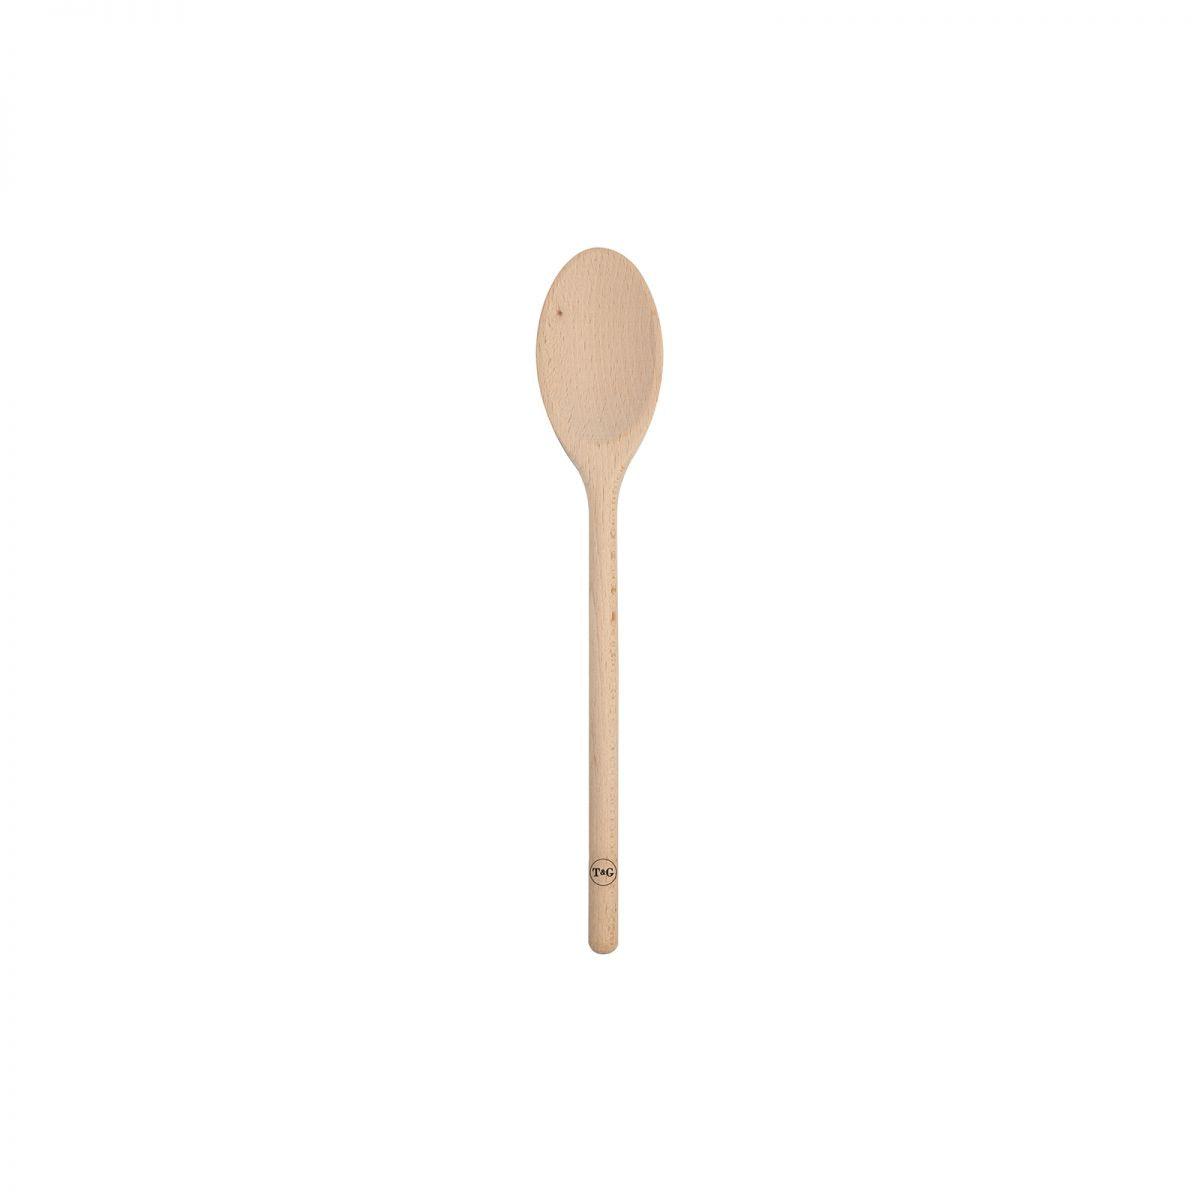 Spoon - 300mm - RUTHERFORD & Co